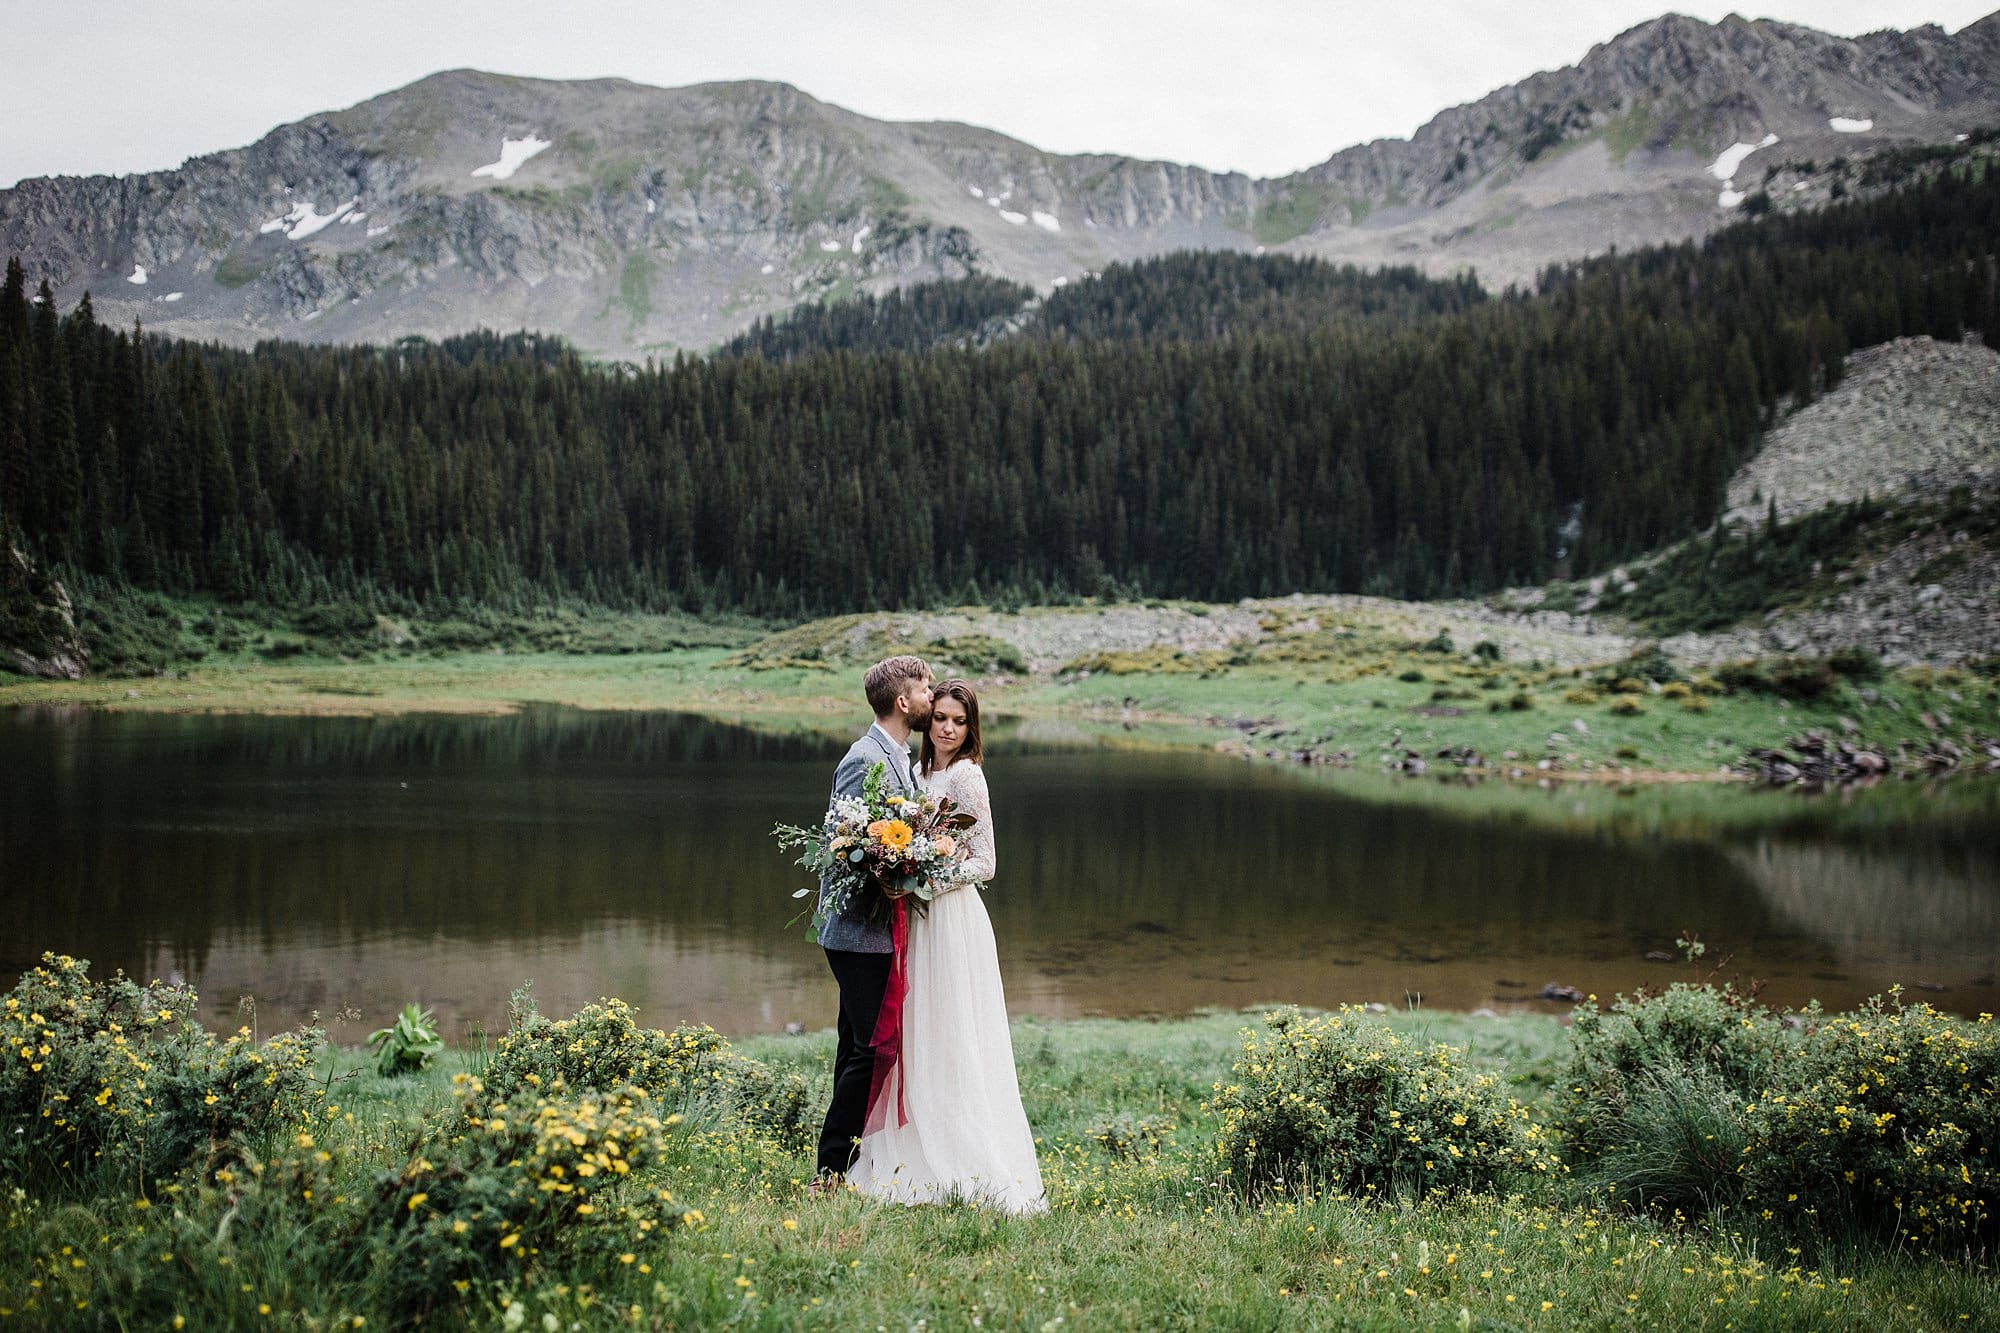 A man kisses his bride in front of the Southern Rockies and a lake in Taos 